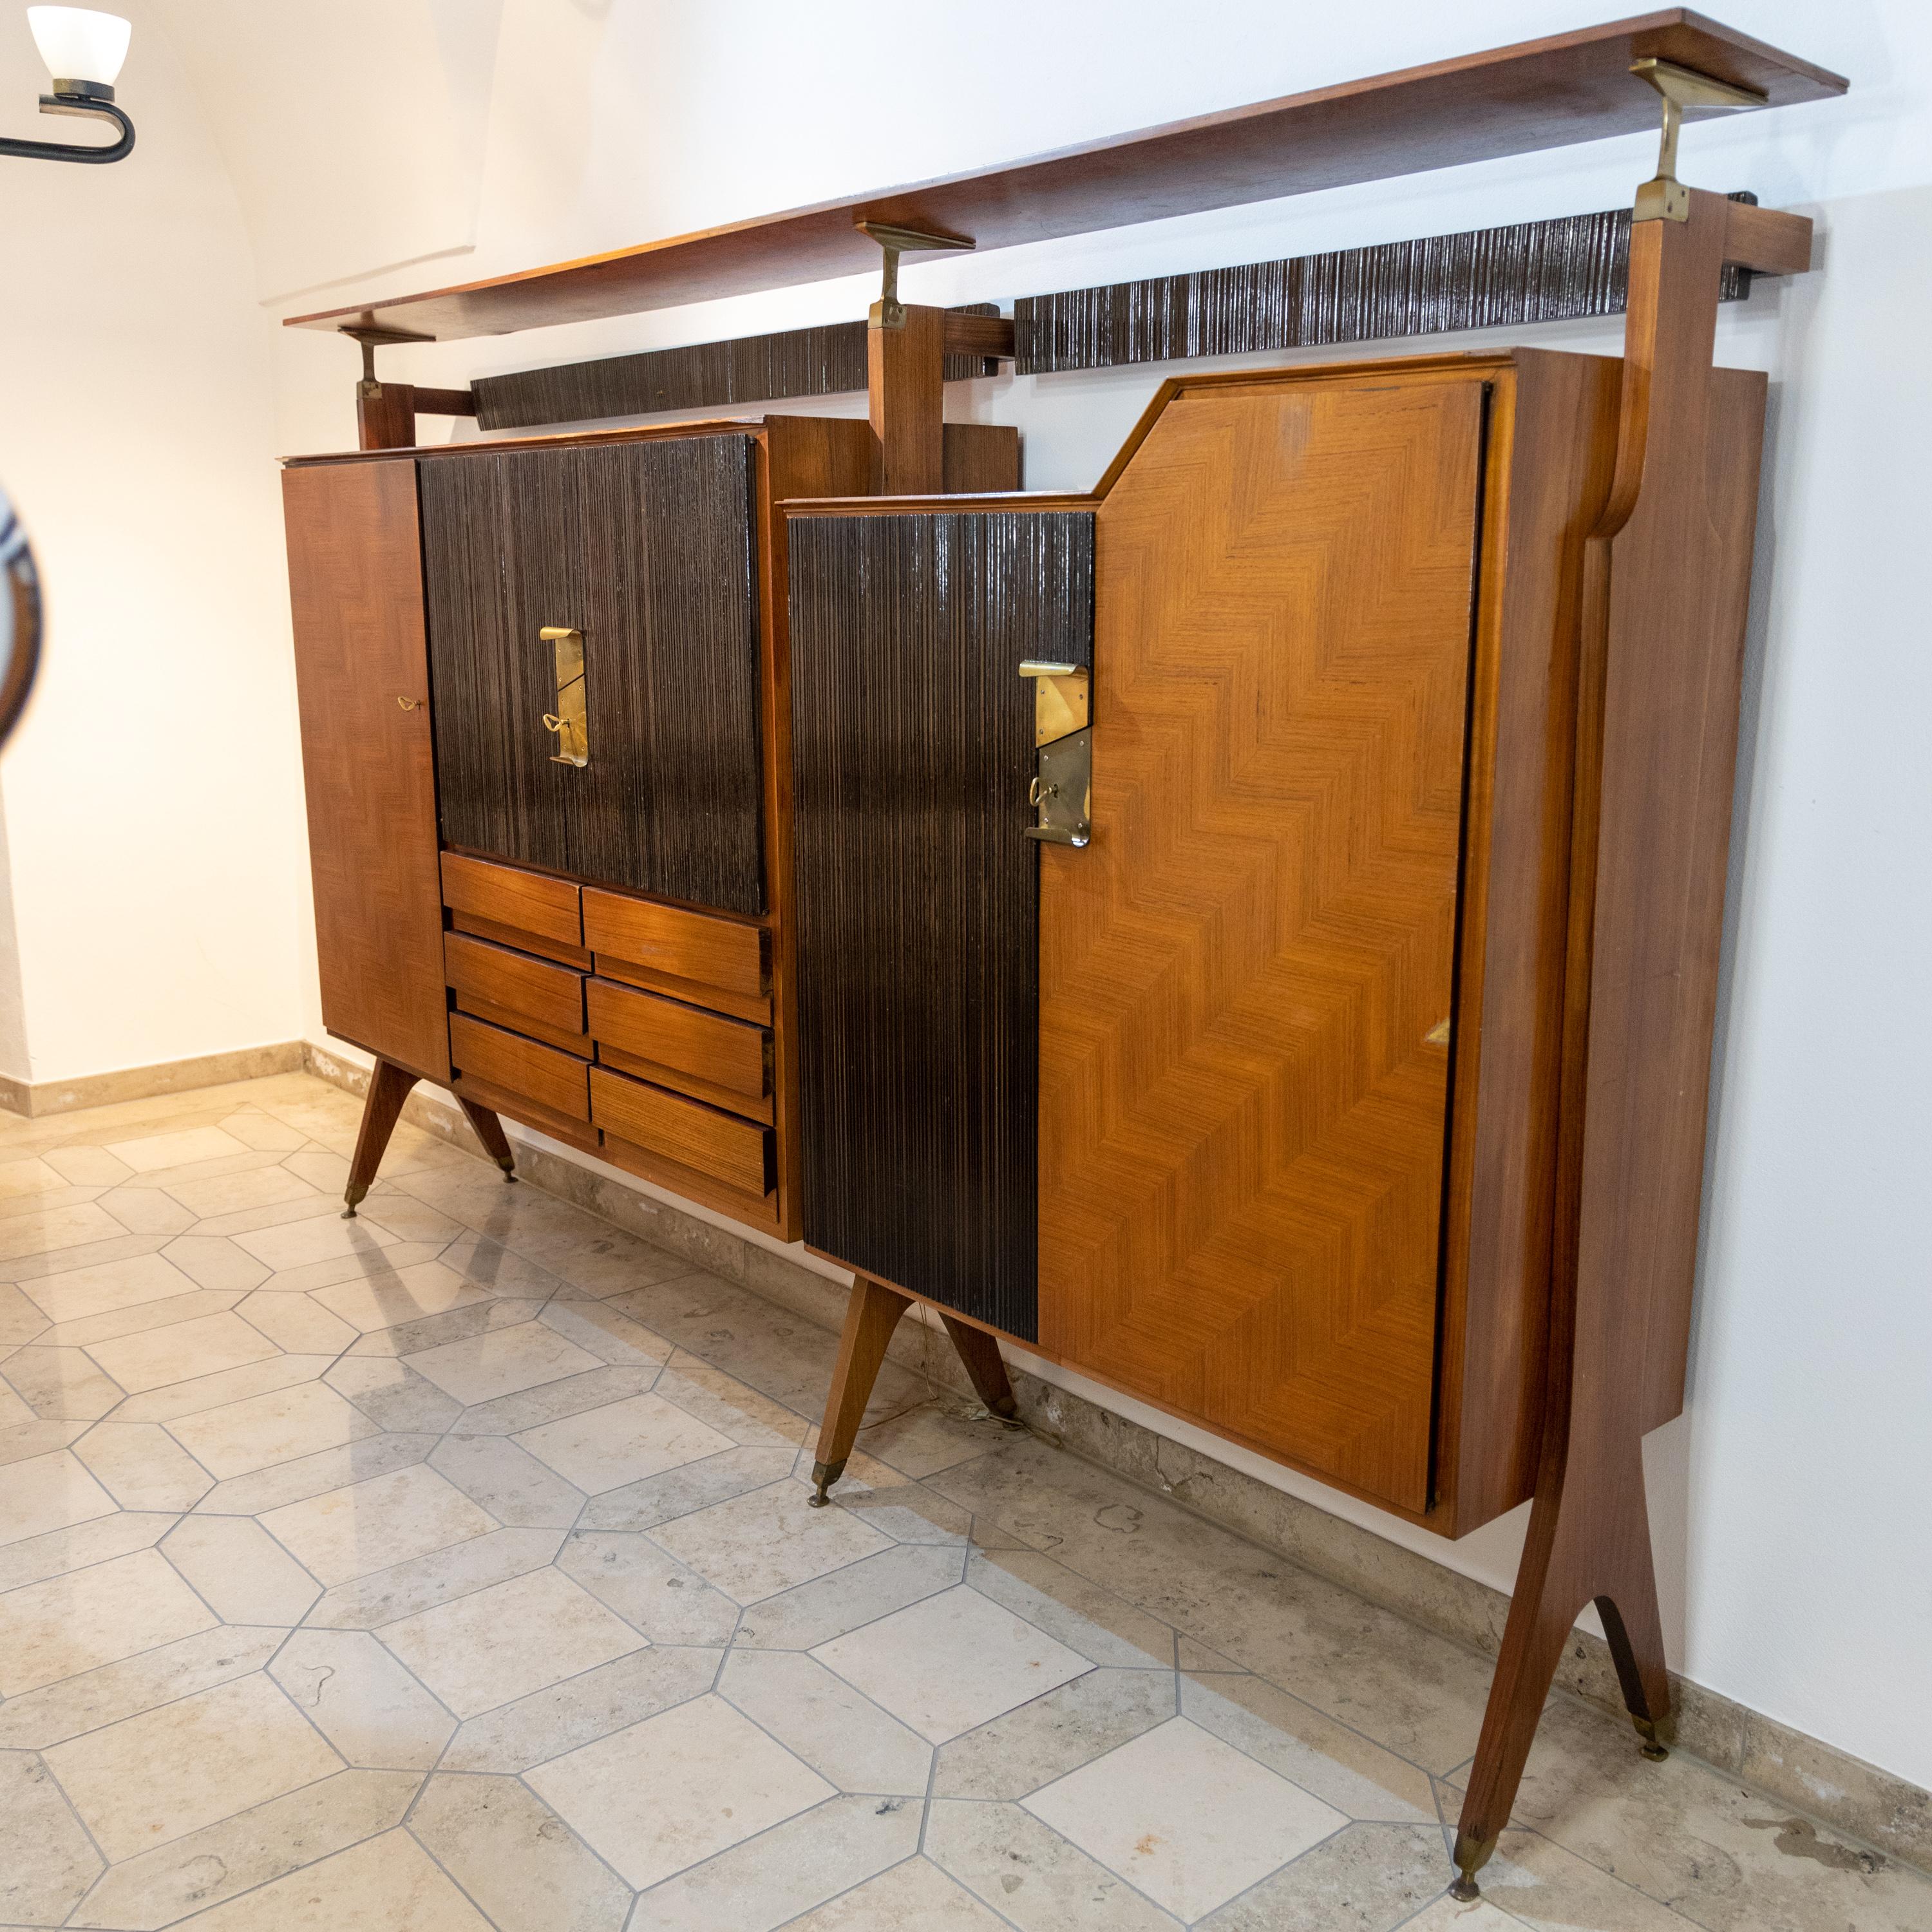 Bar cabinet standing on forked legs with asymmetrical doors and grooved or veneered surfaces and a continuous shelf on top.